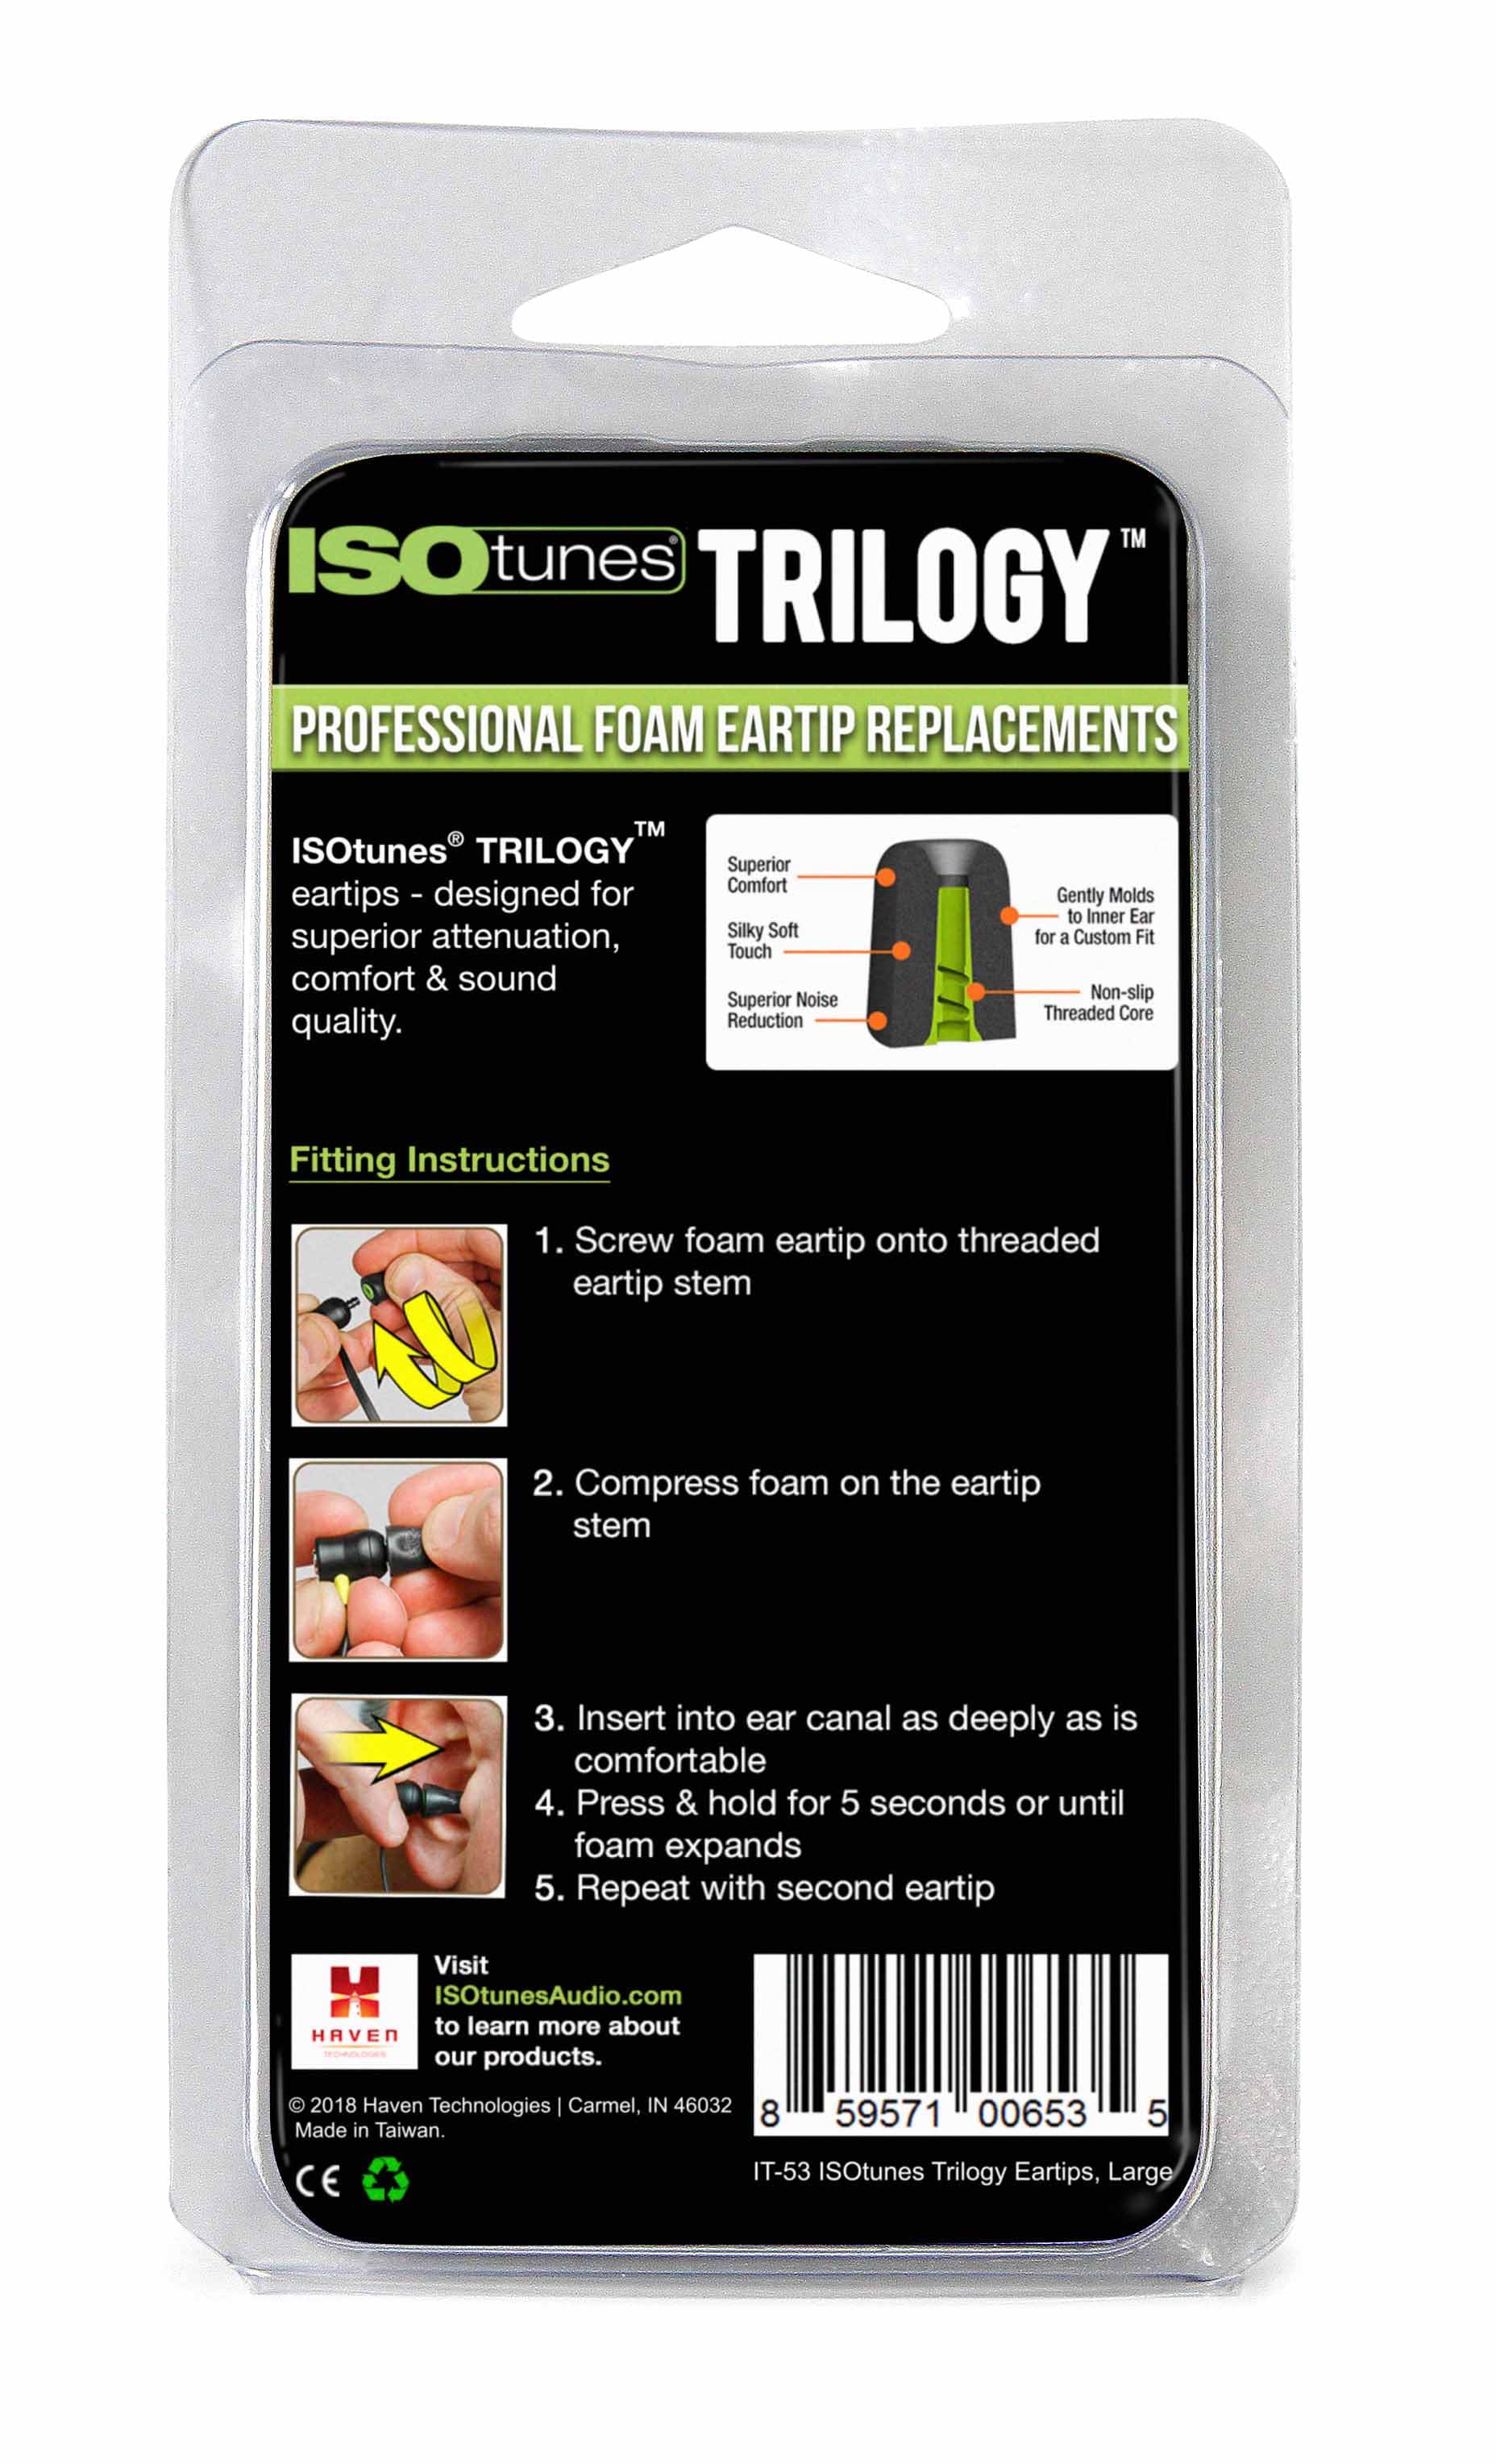 TRILOGY™ Foam Replacement Eartips (5 pair pack) - ISOtunes®